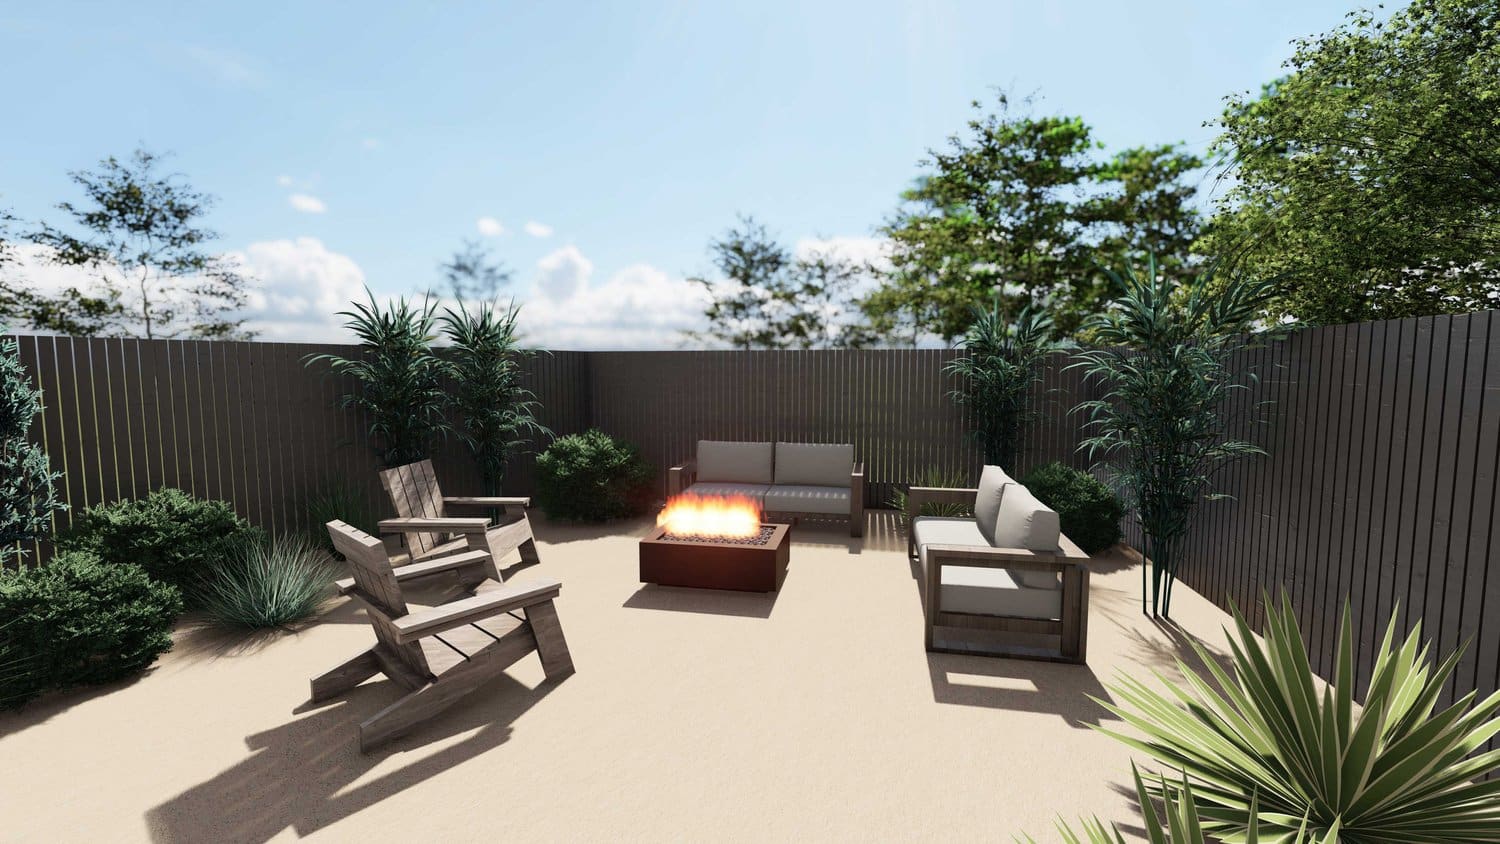 Park City backyard with fire pit seating place and surrounding plants